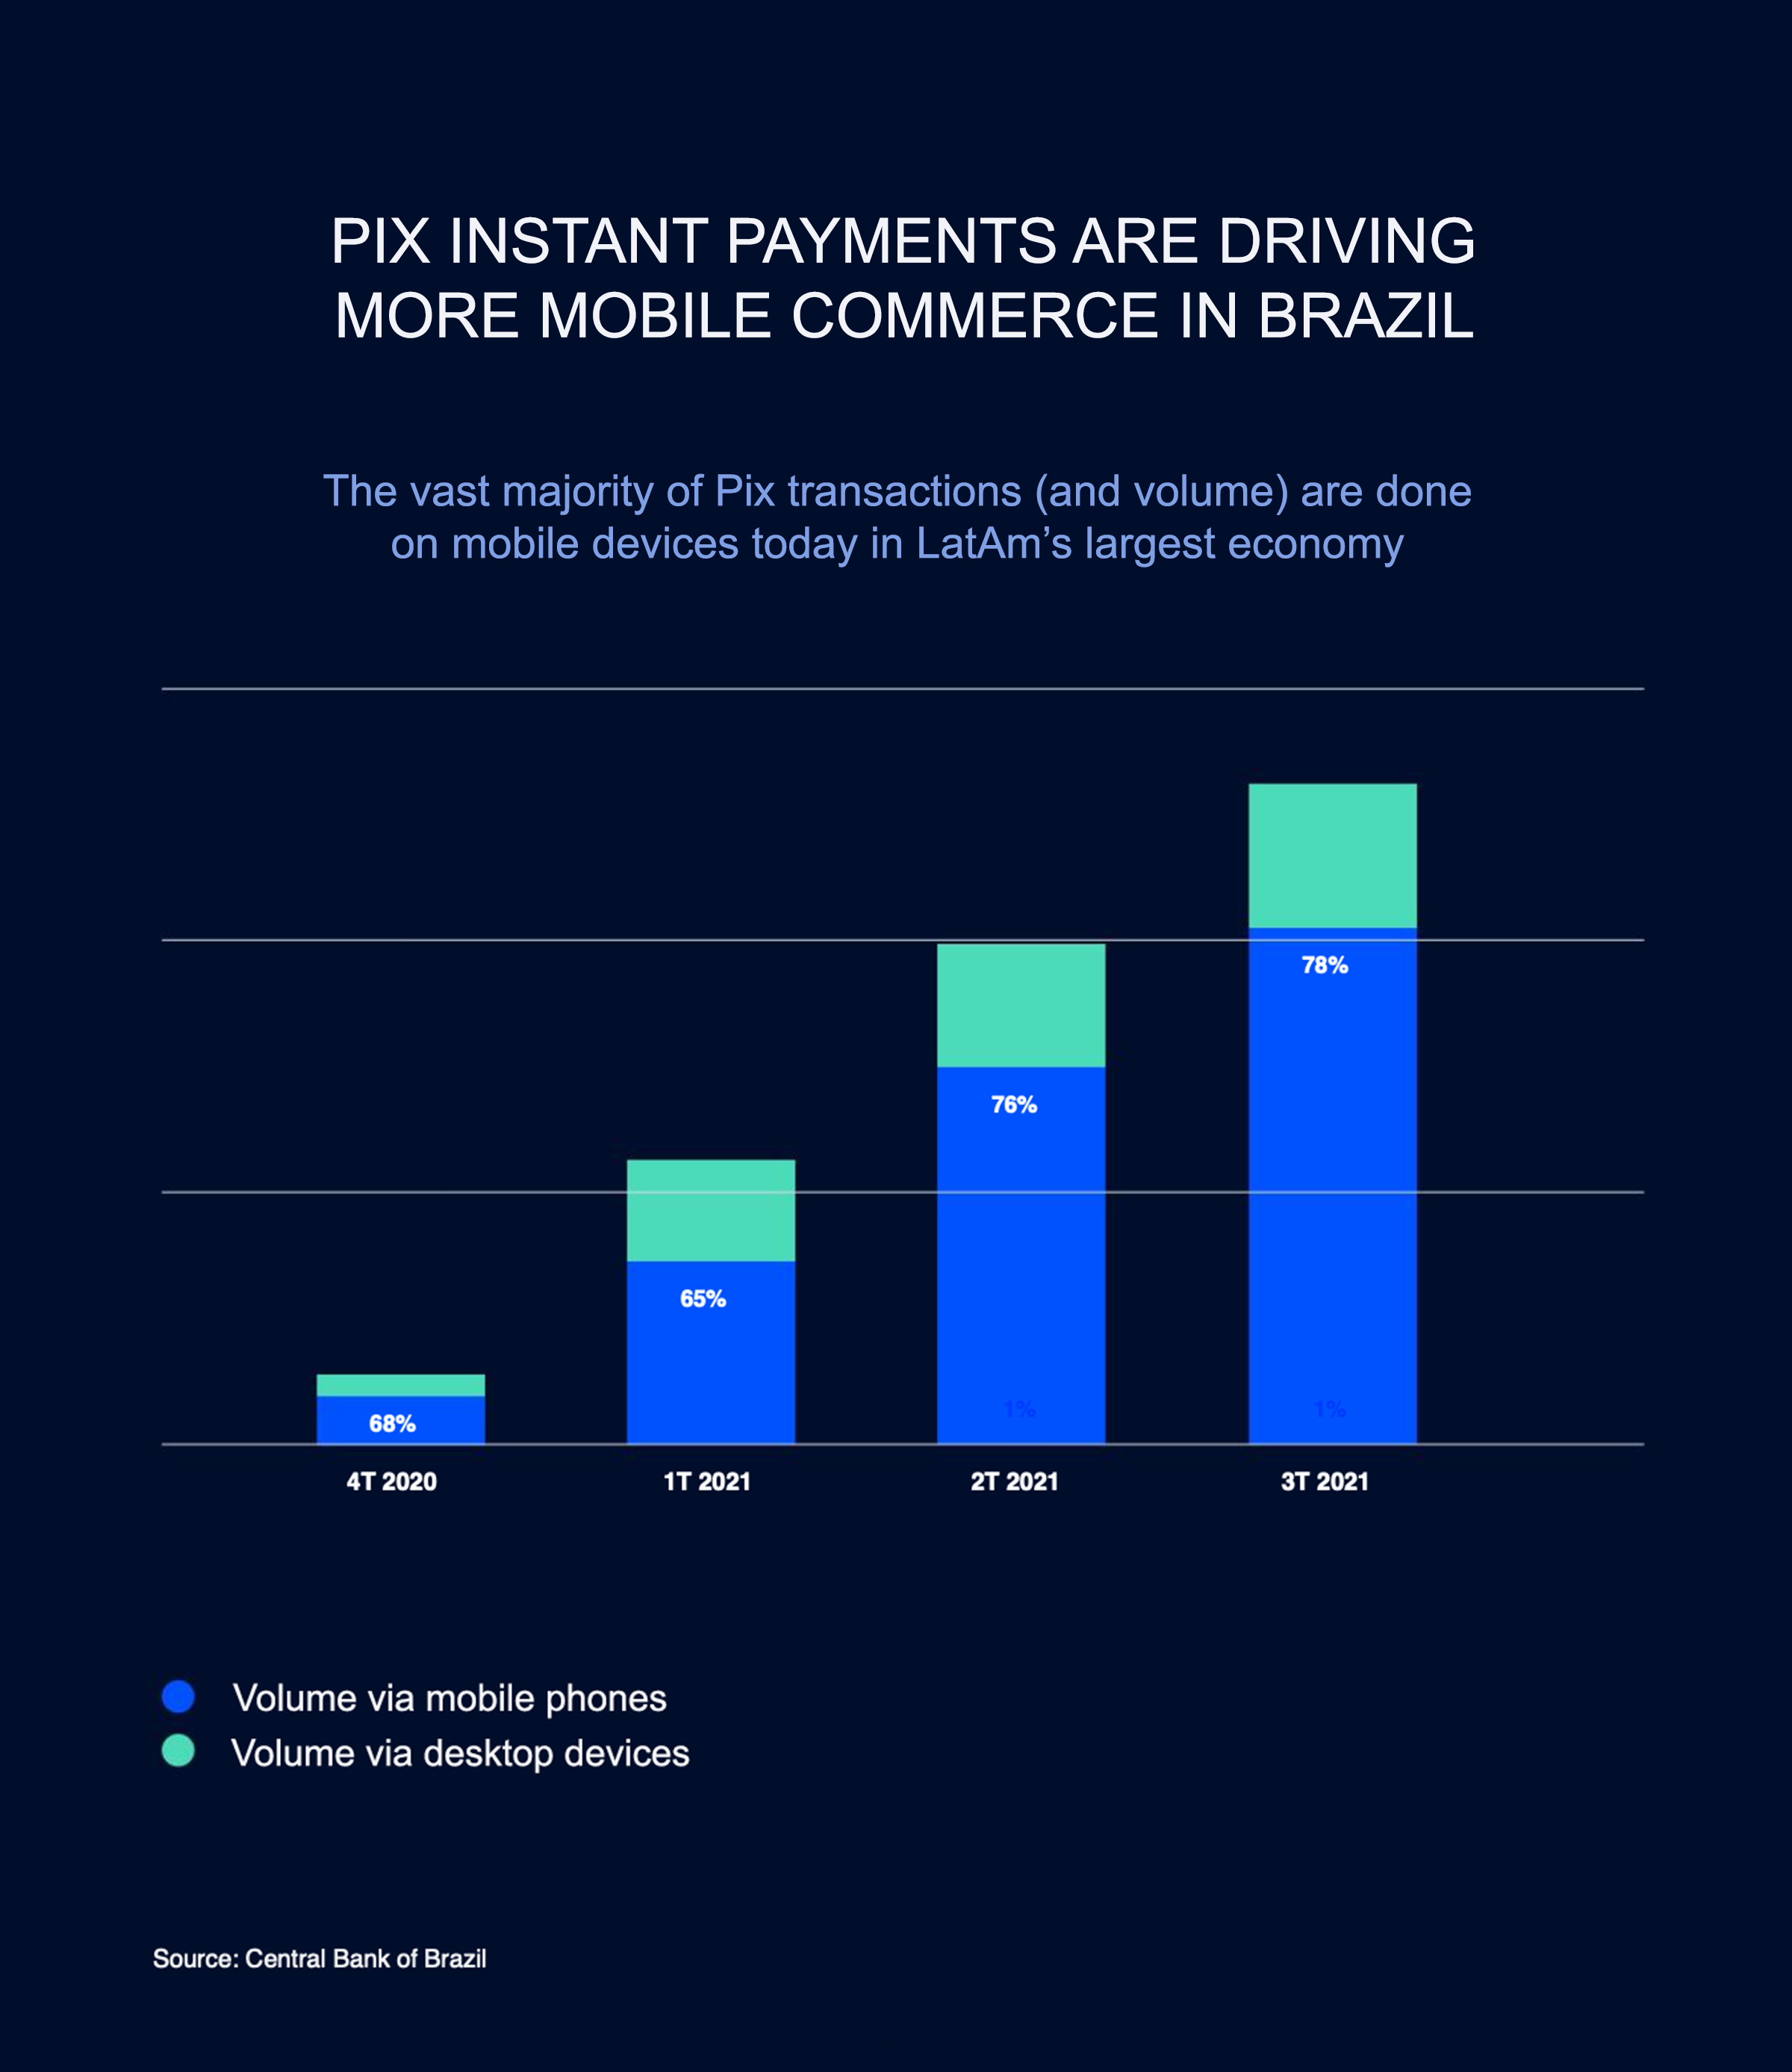 Pix instant payments are driving more m-commerce in Brazil as a majority of transactions are taking place on mobile vs. desktop devices using Pix.